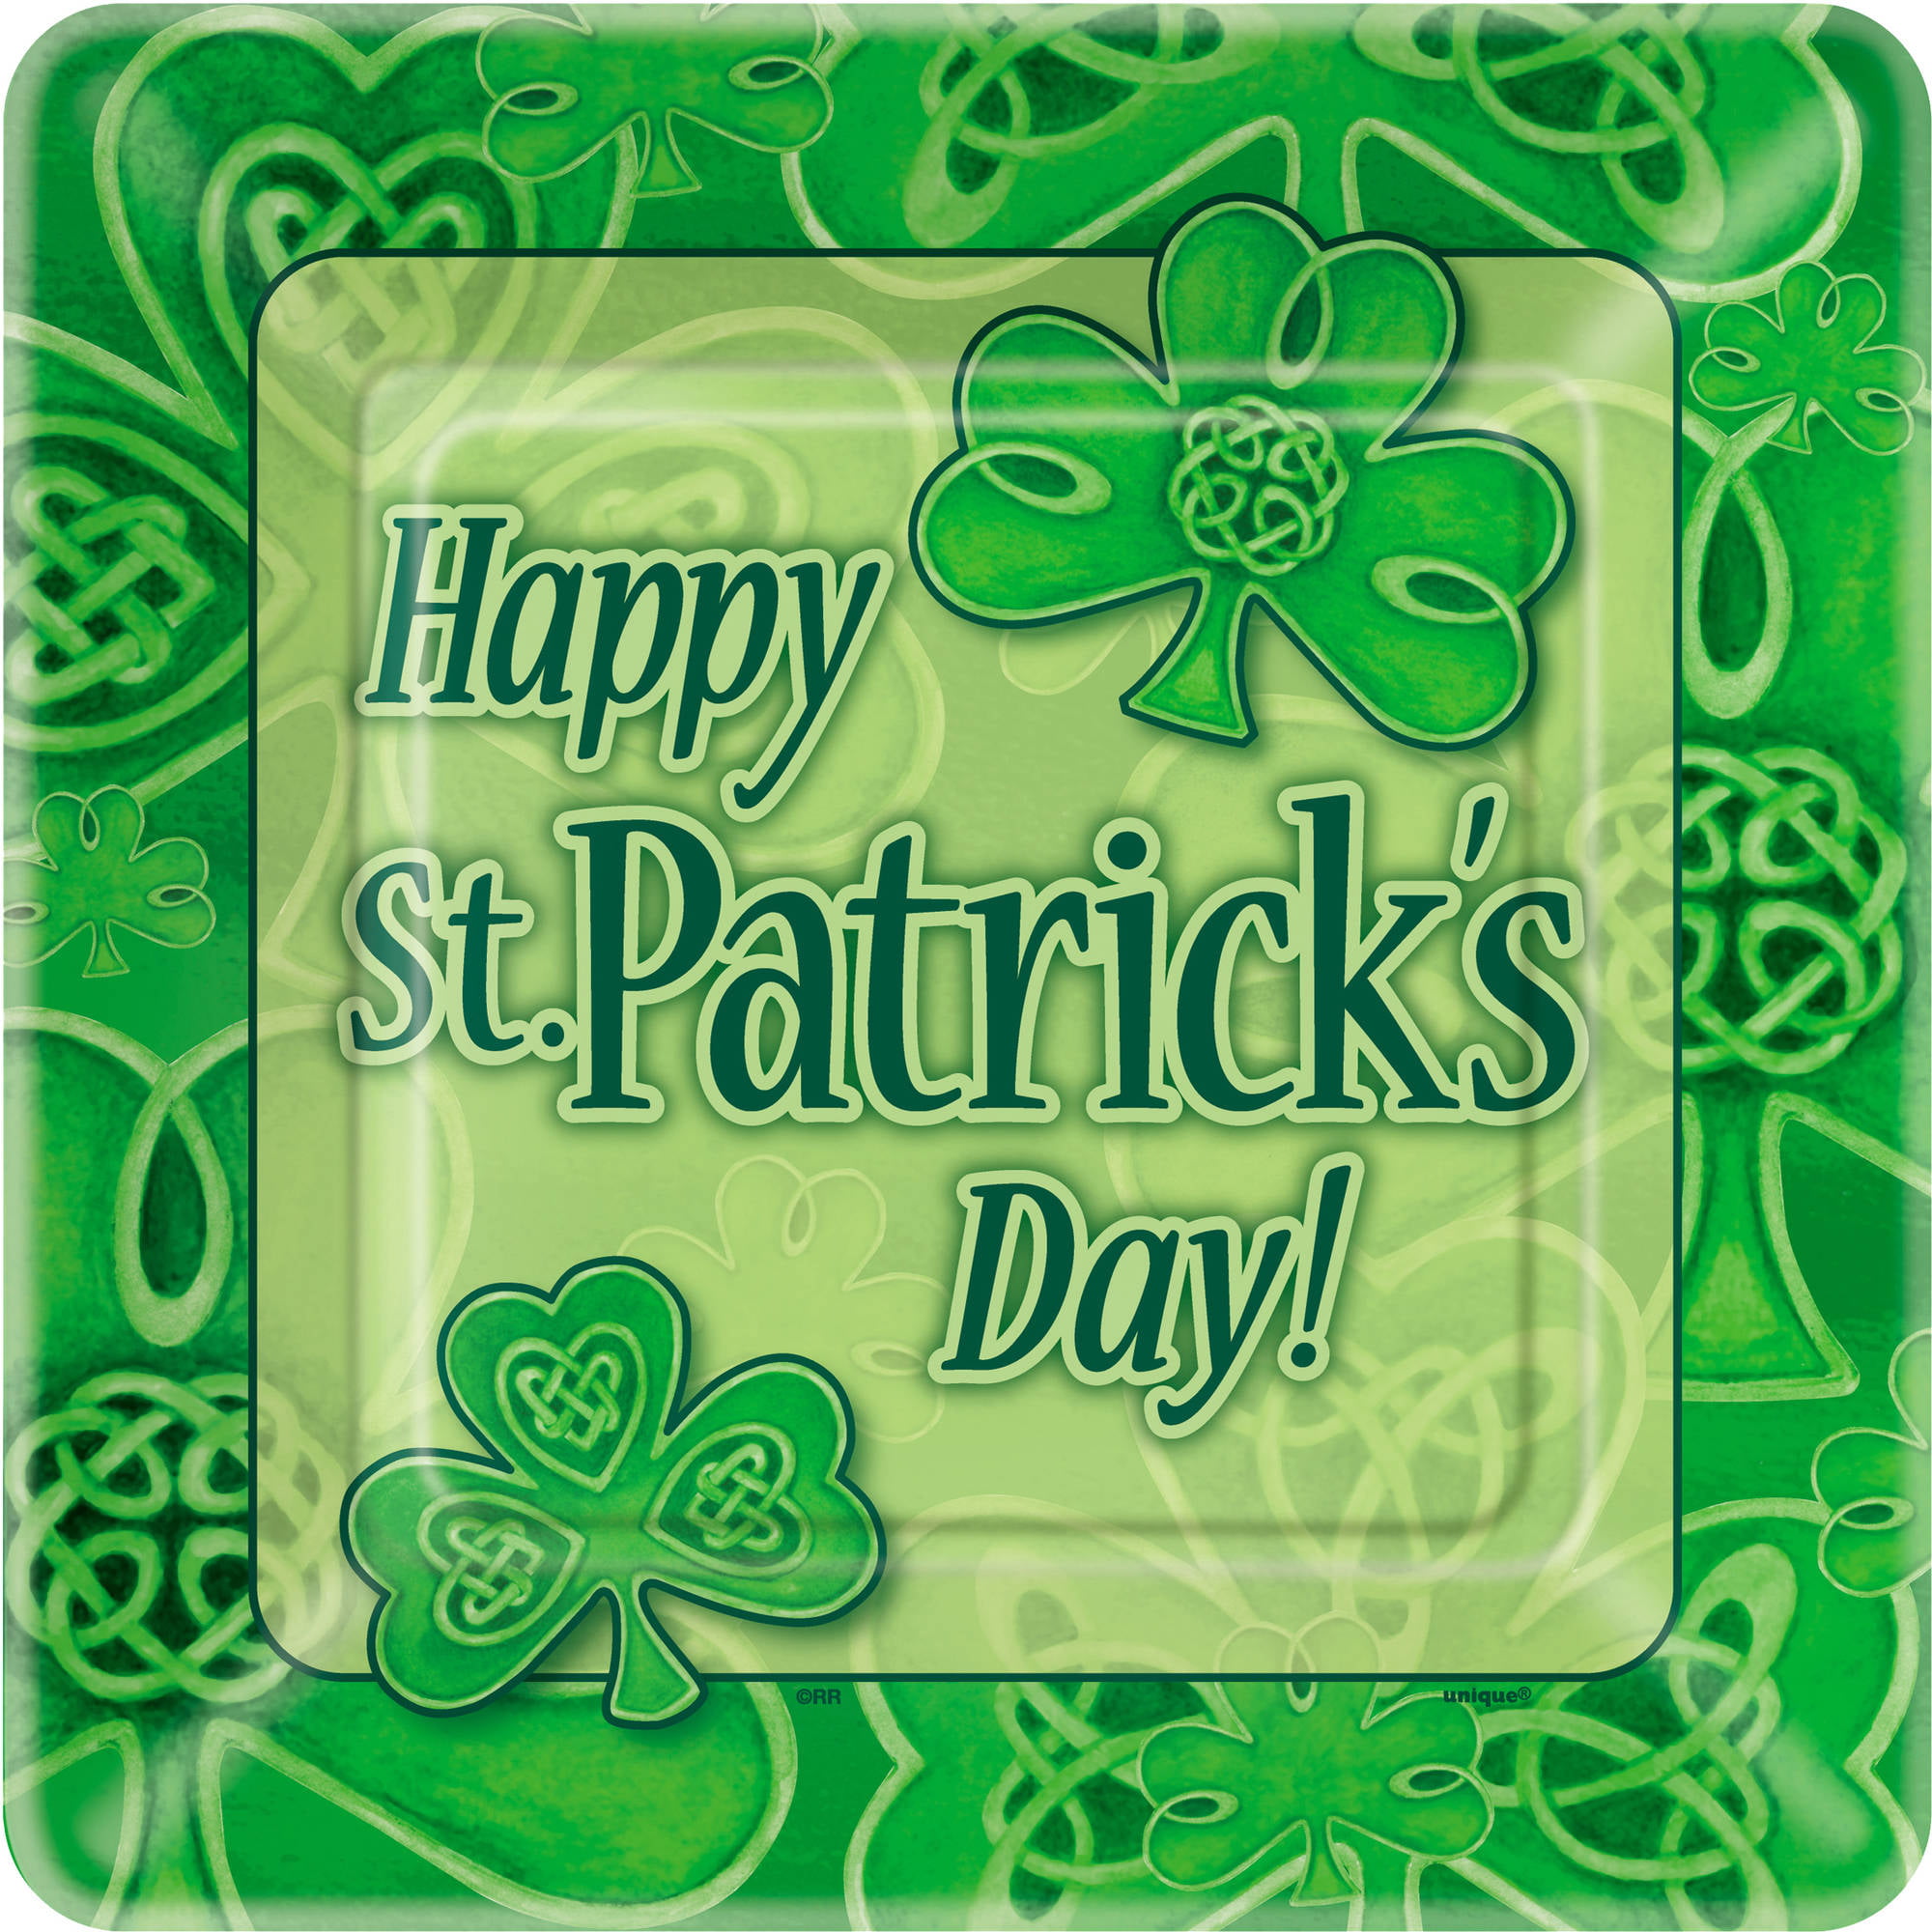 Patrick's Day JIG Napkins choose Beverage or Luncheon St